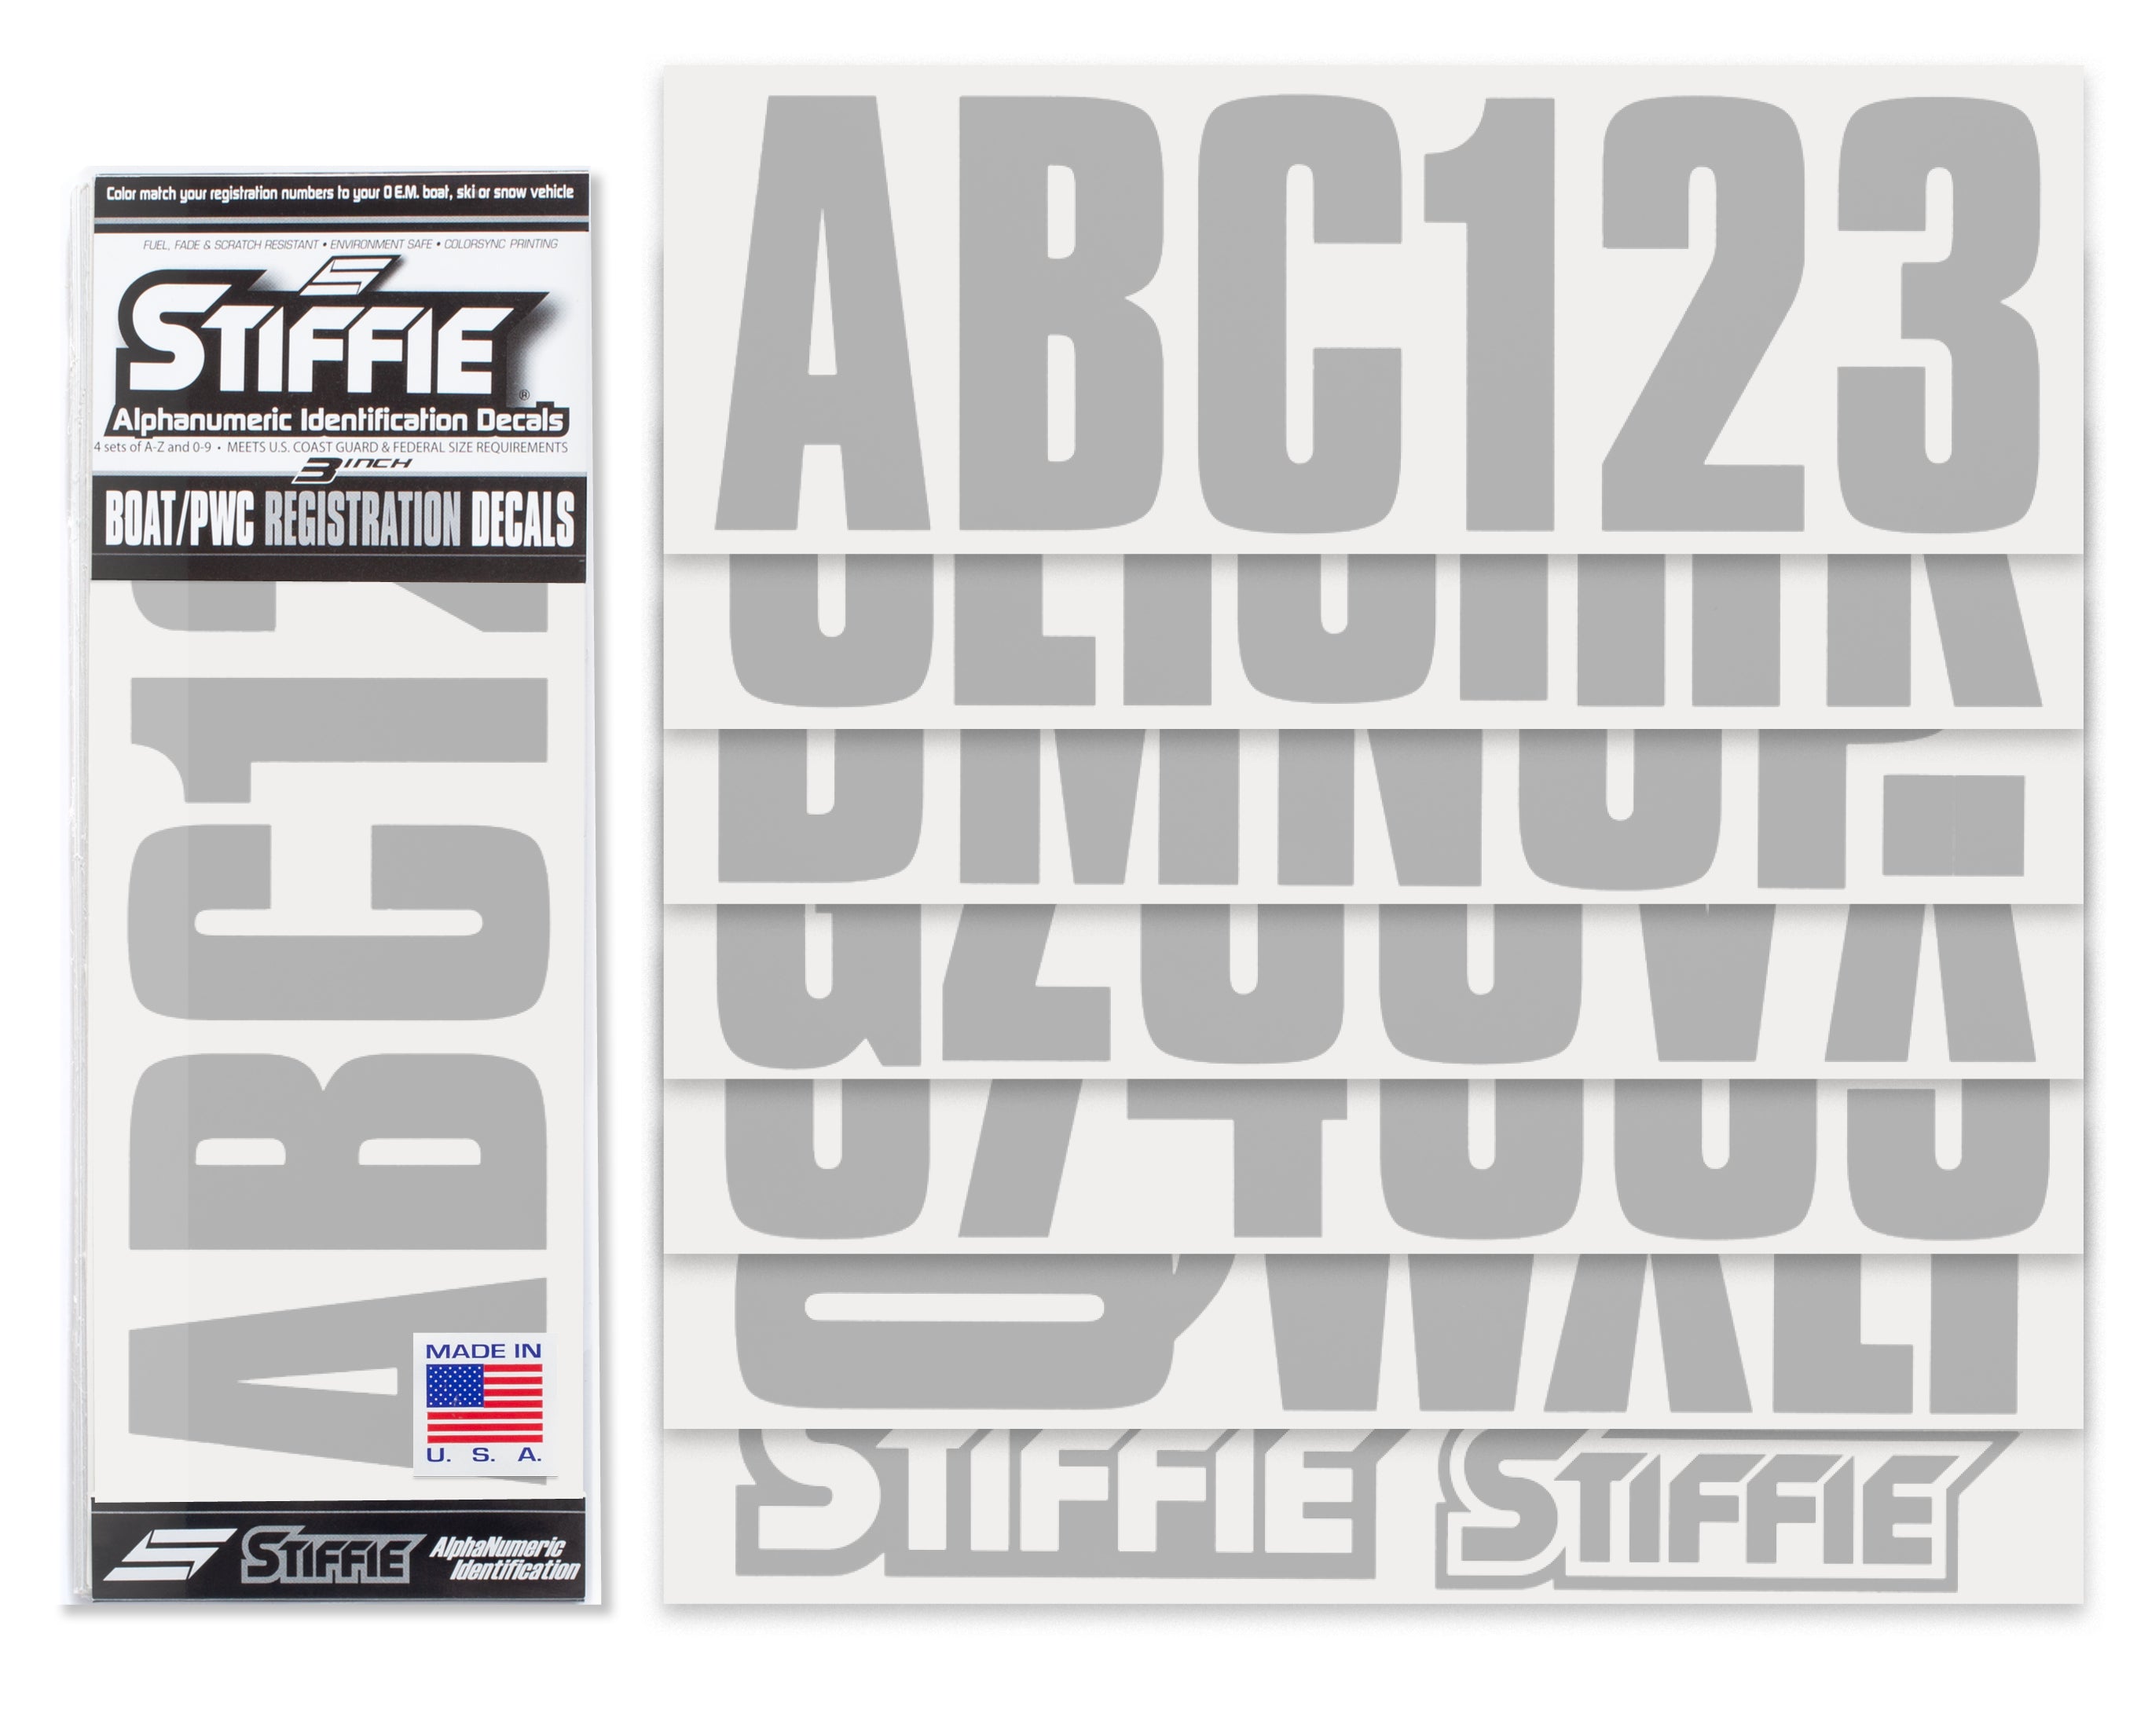 STIFFIE Uniline Silver 3" ID Kit Alpha-Numeric Registration Identification Numbers Stickers Decals for Boats & Personal Watercraft